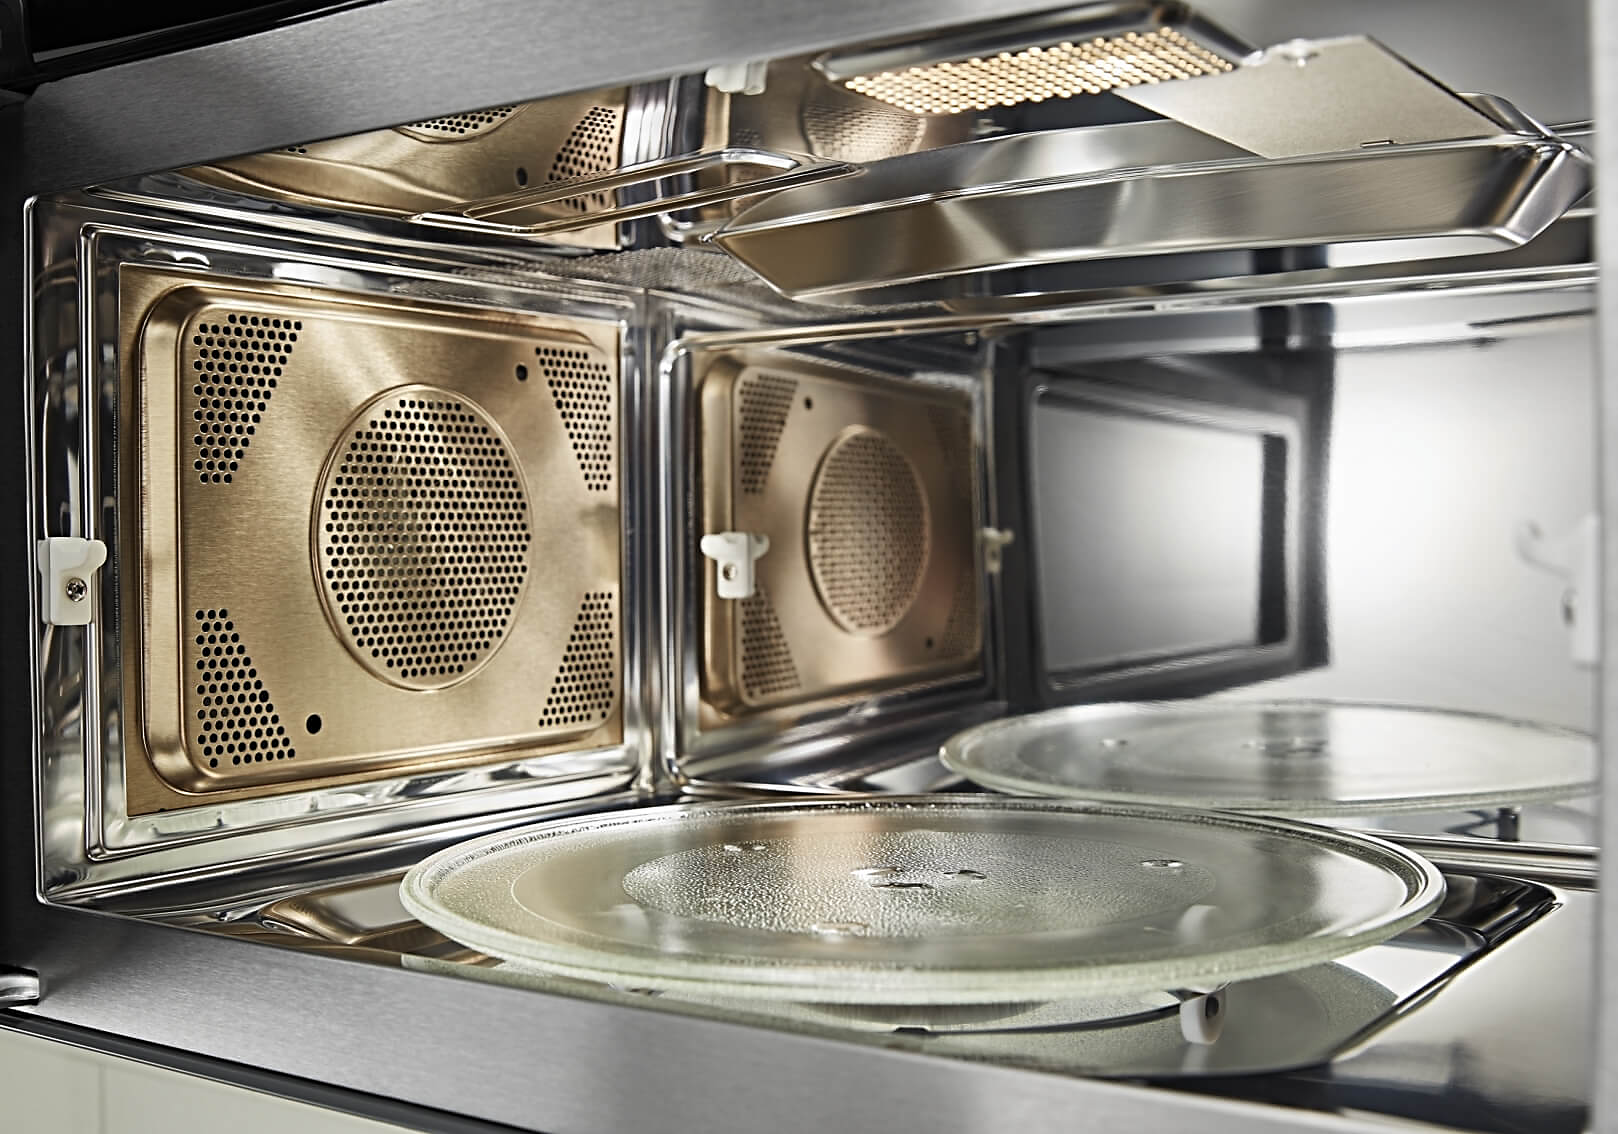 Shining, clean microwave interior